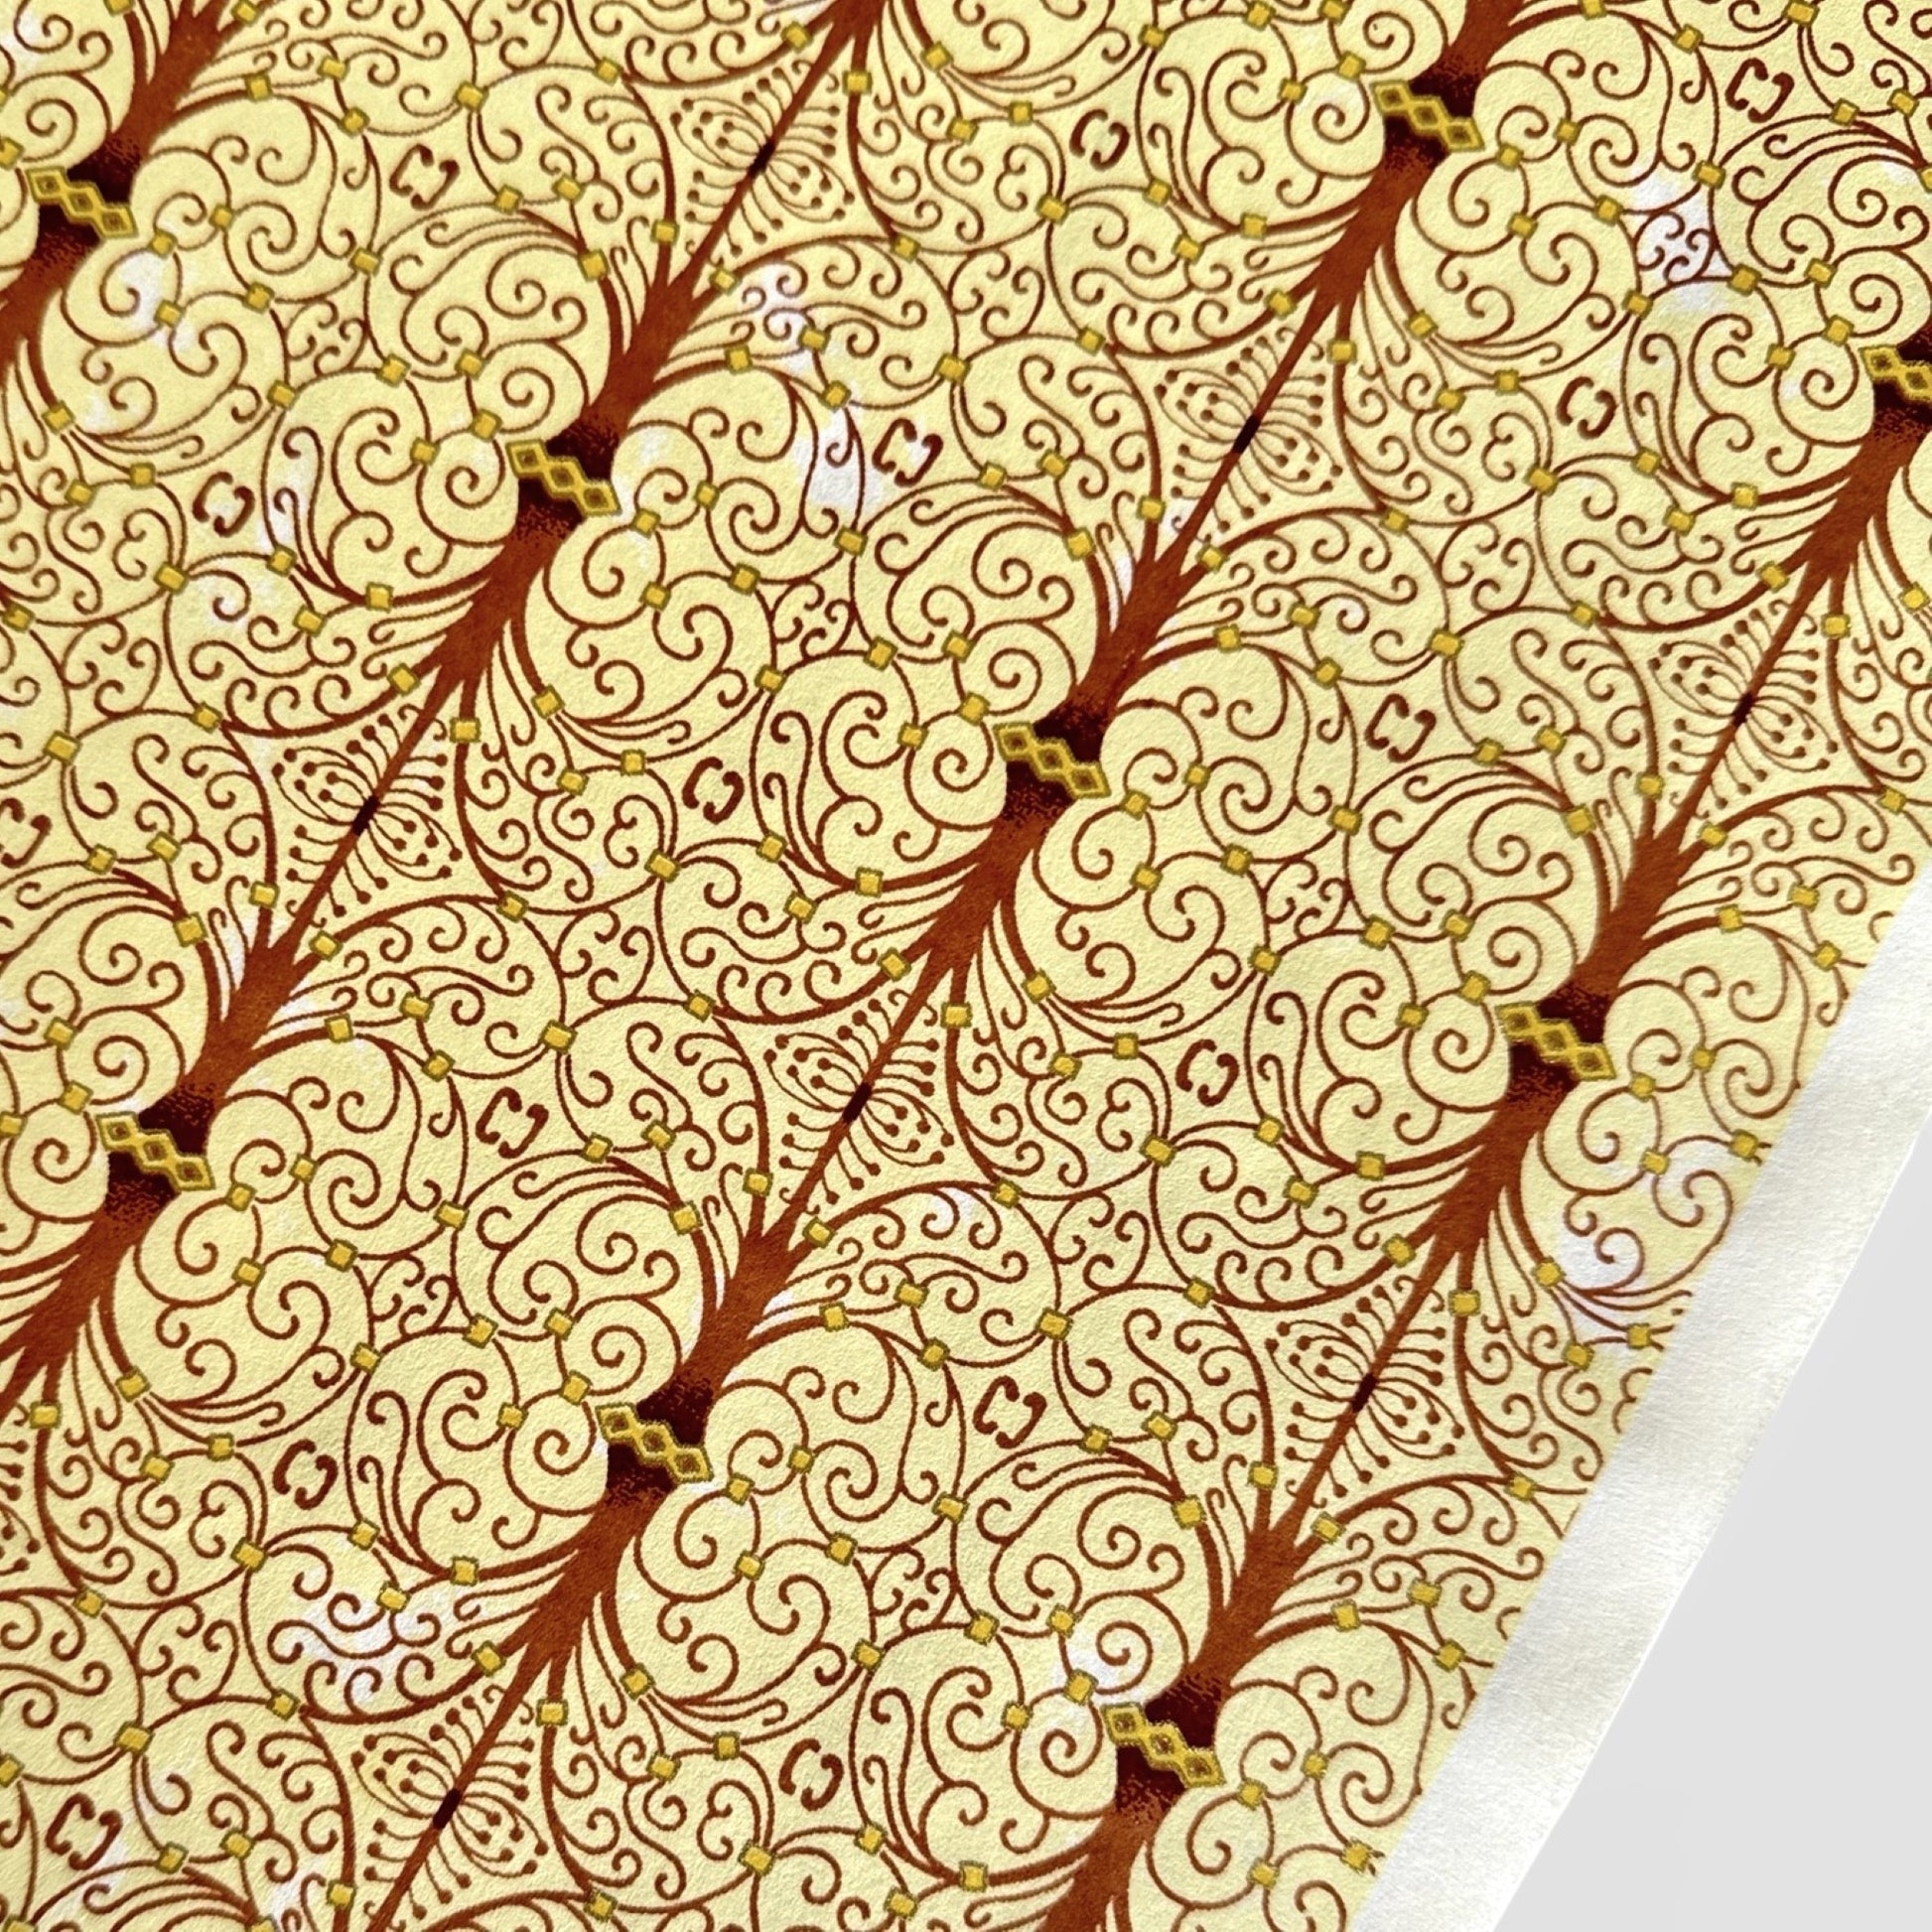 Japanese silkscreen chiyogami paper with a intricate filigree trellis design in brown with gold accent, close up